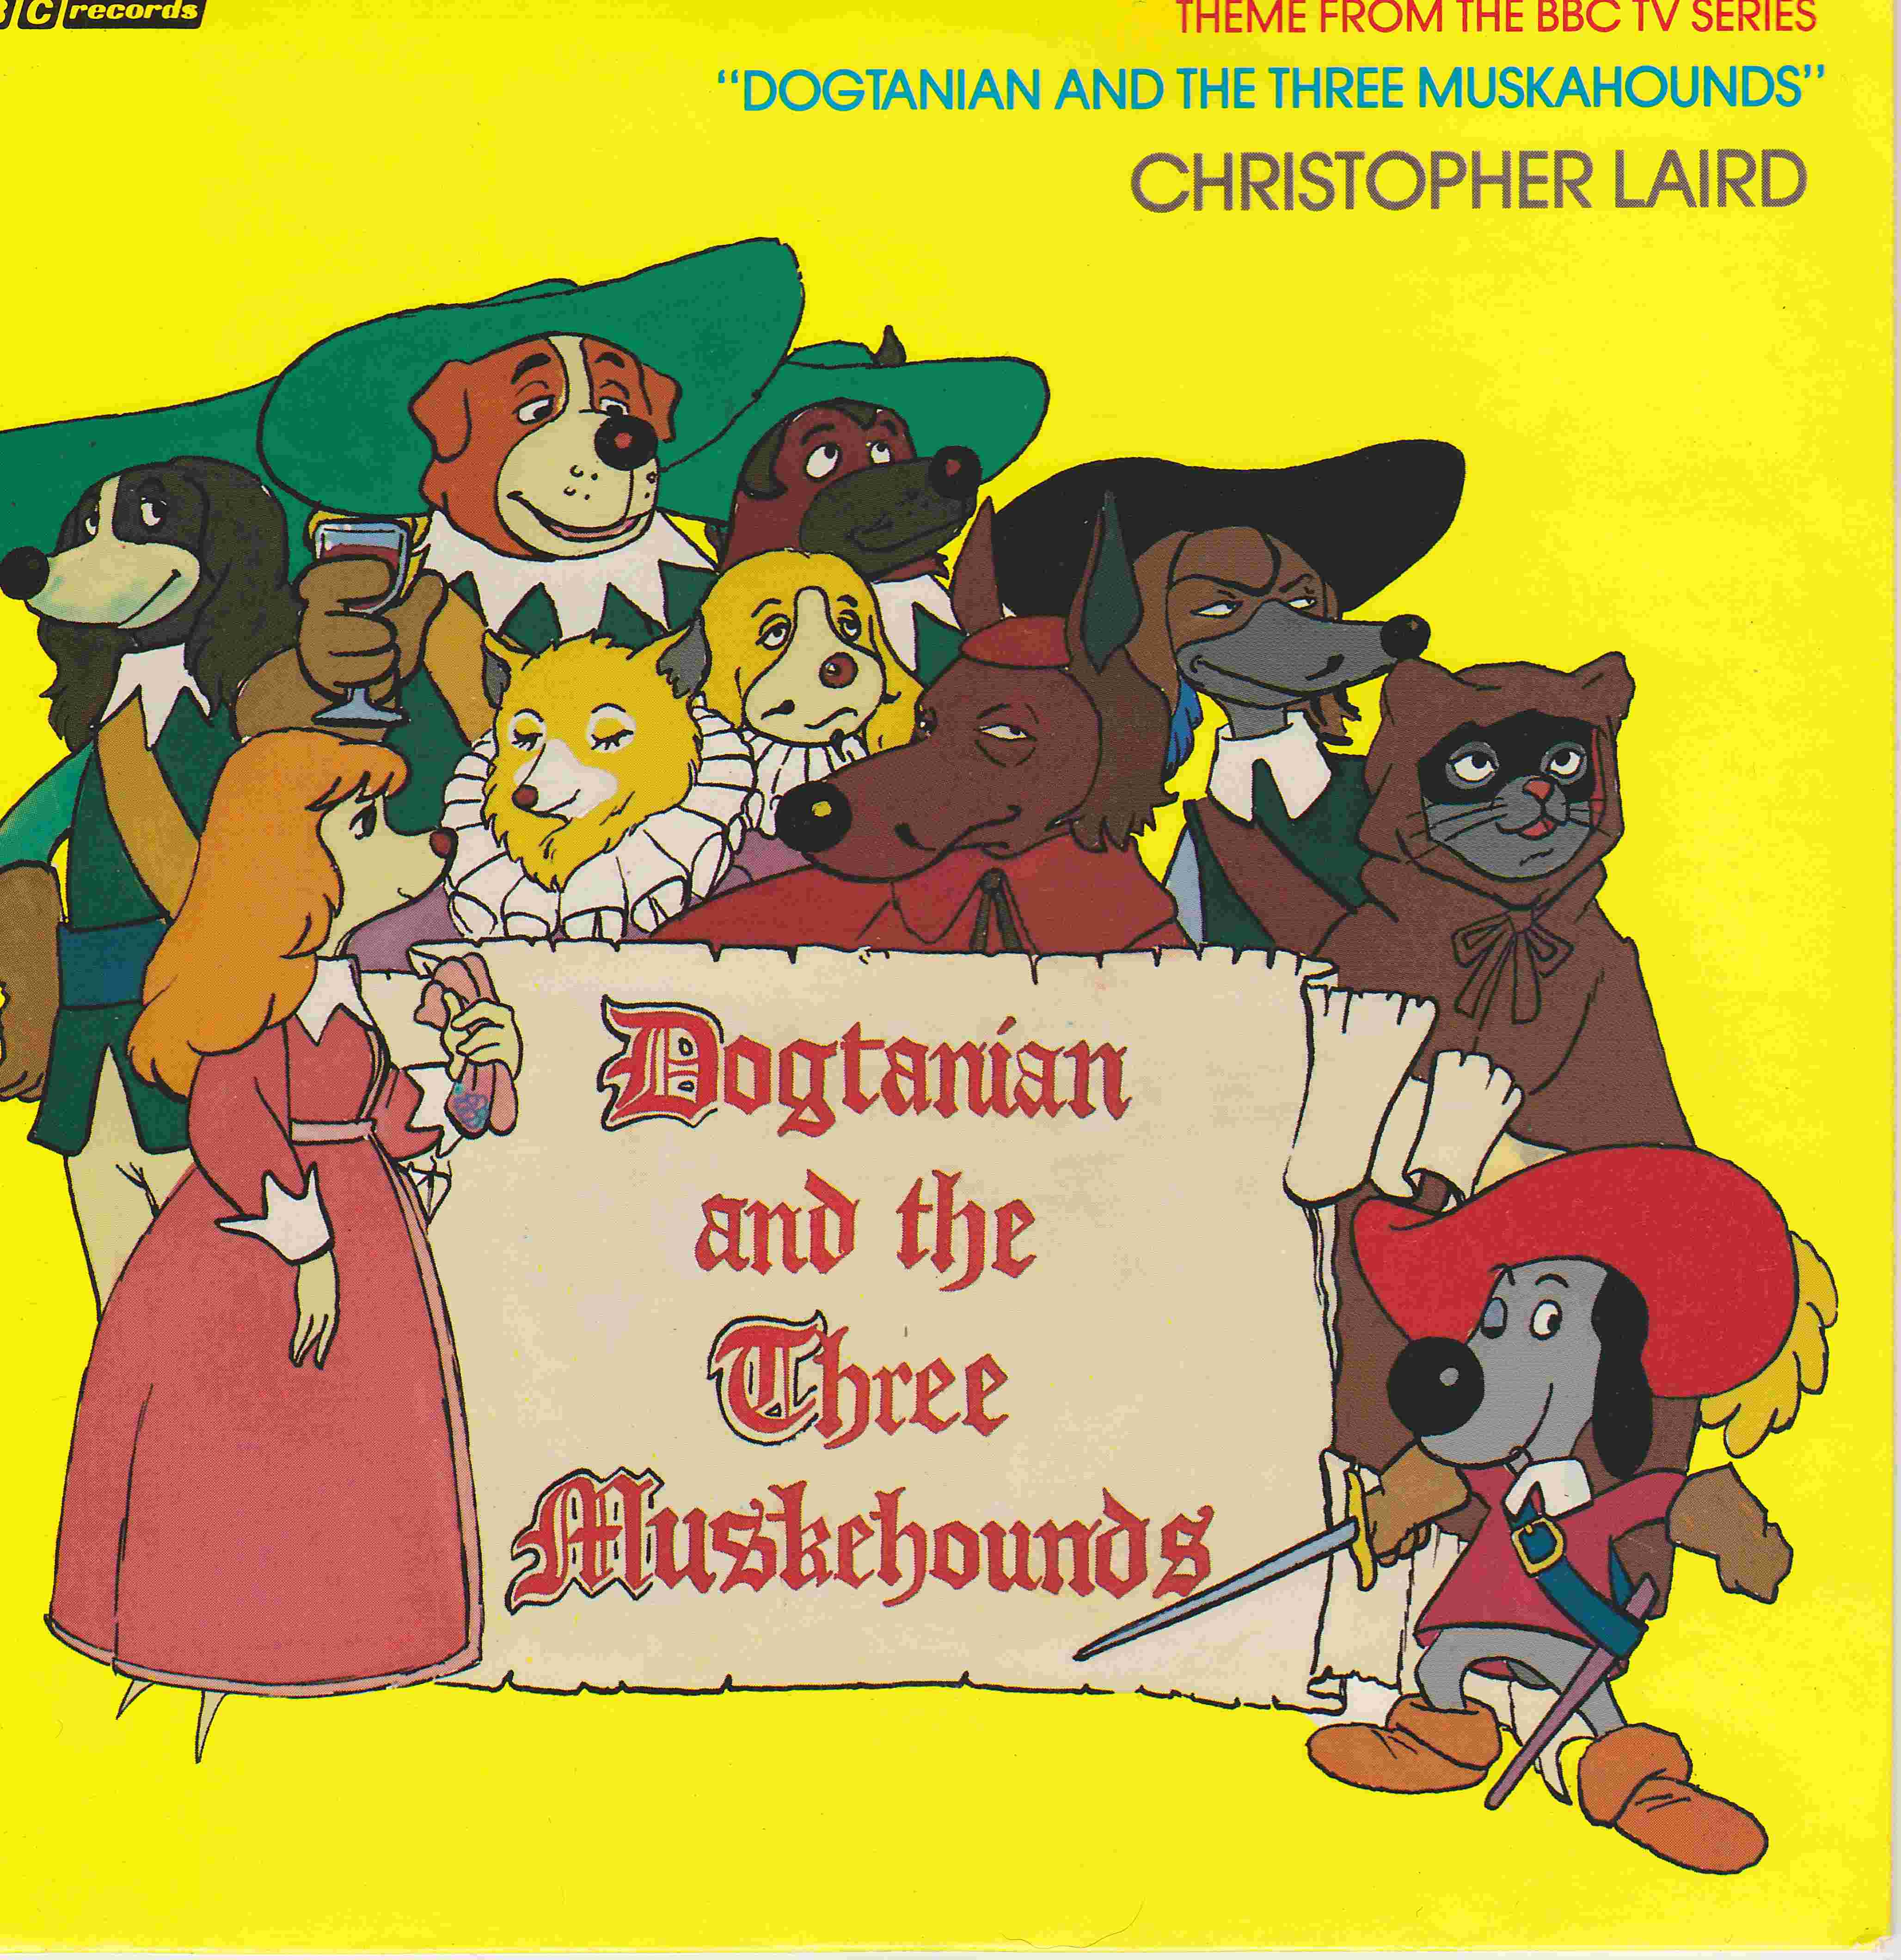 Picture of RESL 165 Dogtanian and the three muskehounds single by artist Christopher Laird / G & M Orchestra from the BBC records and Tapes library